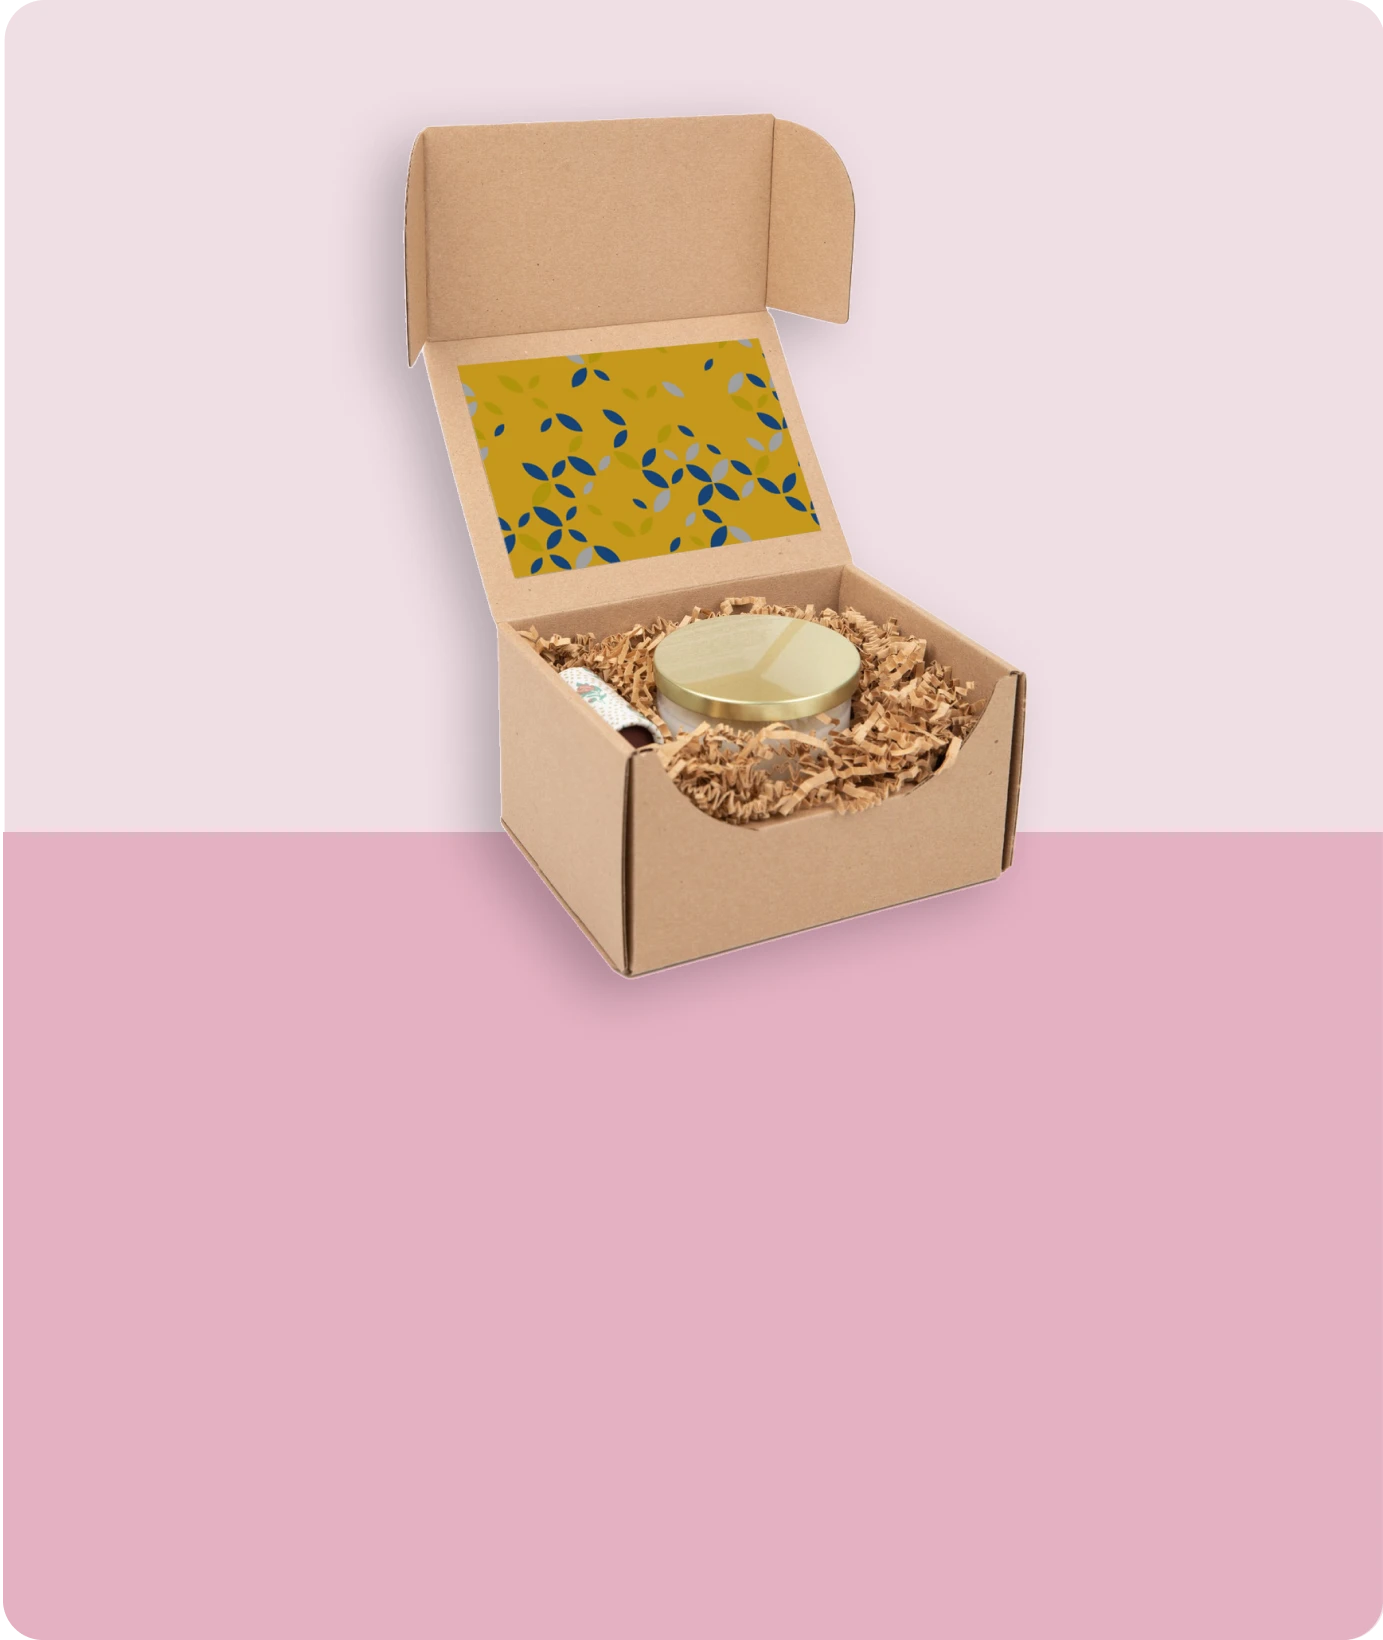 Candle Subscription Boxes related product image | The Box Lane